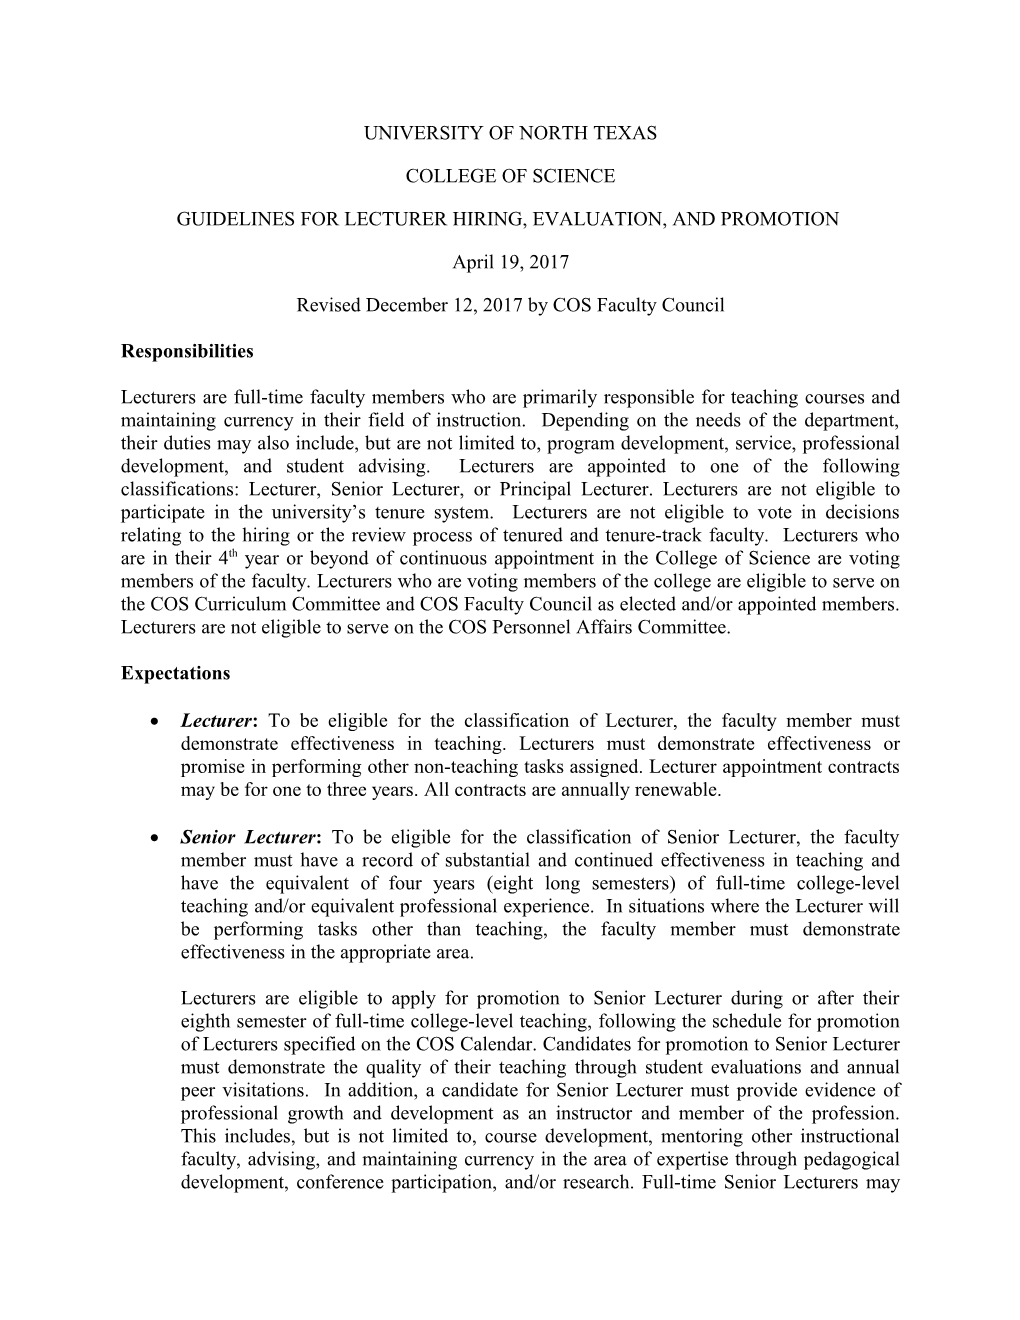 Guidelines for Lecturer Hiring, Evaluation, and Promotion